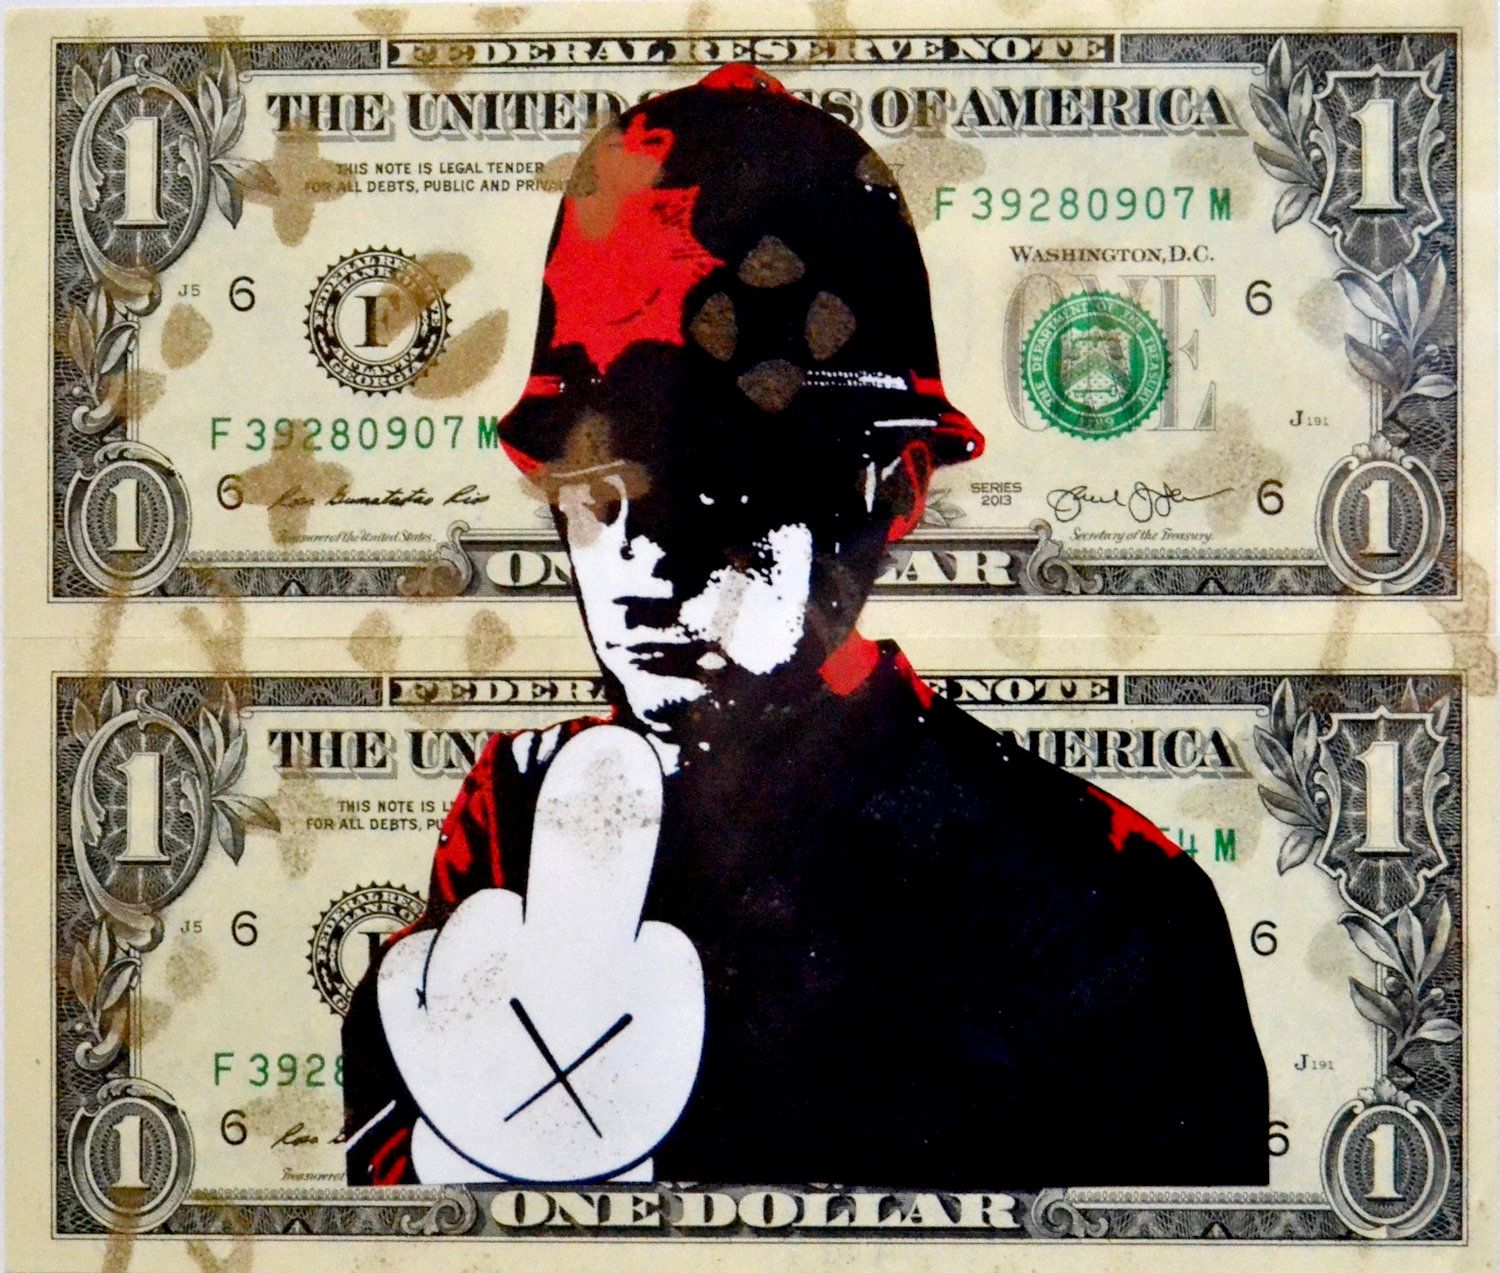 Death NYC Death NYC

Bobby Finger, 2013

Collage and mixed media on banknote

Un&hellip;